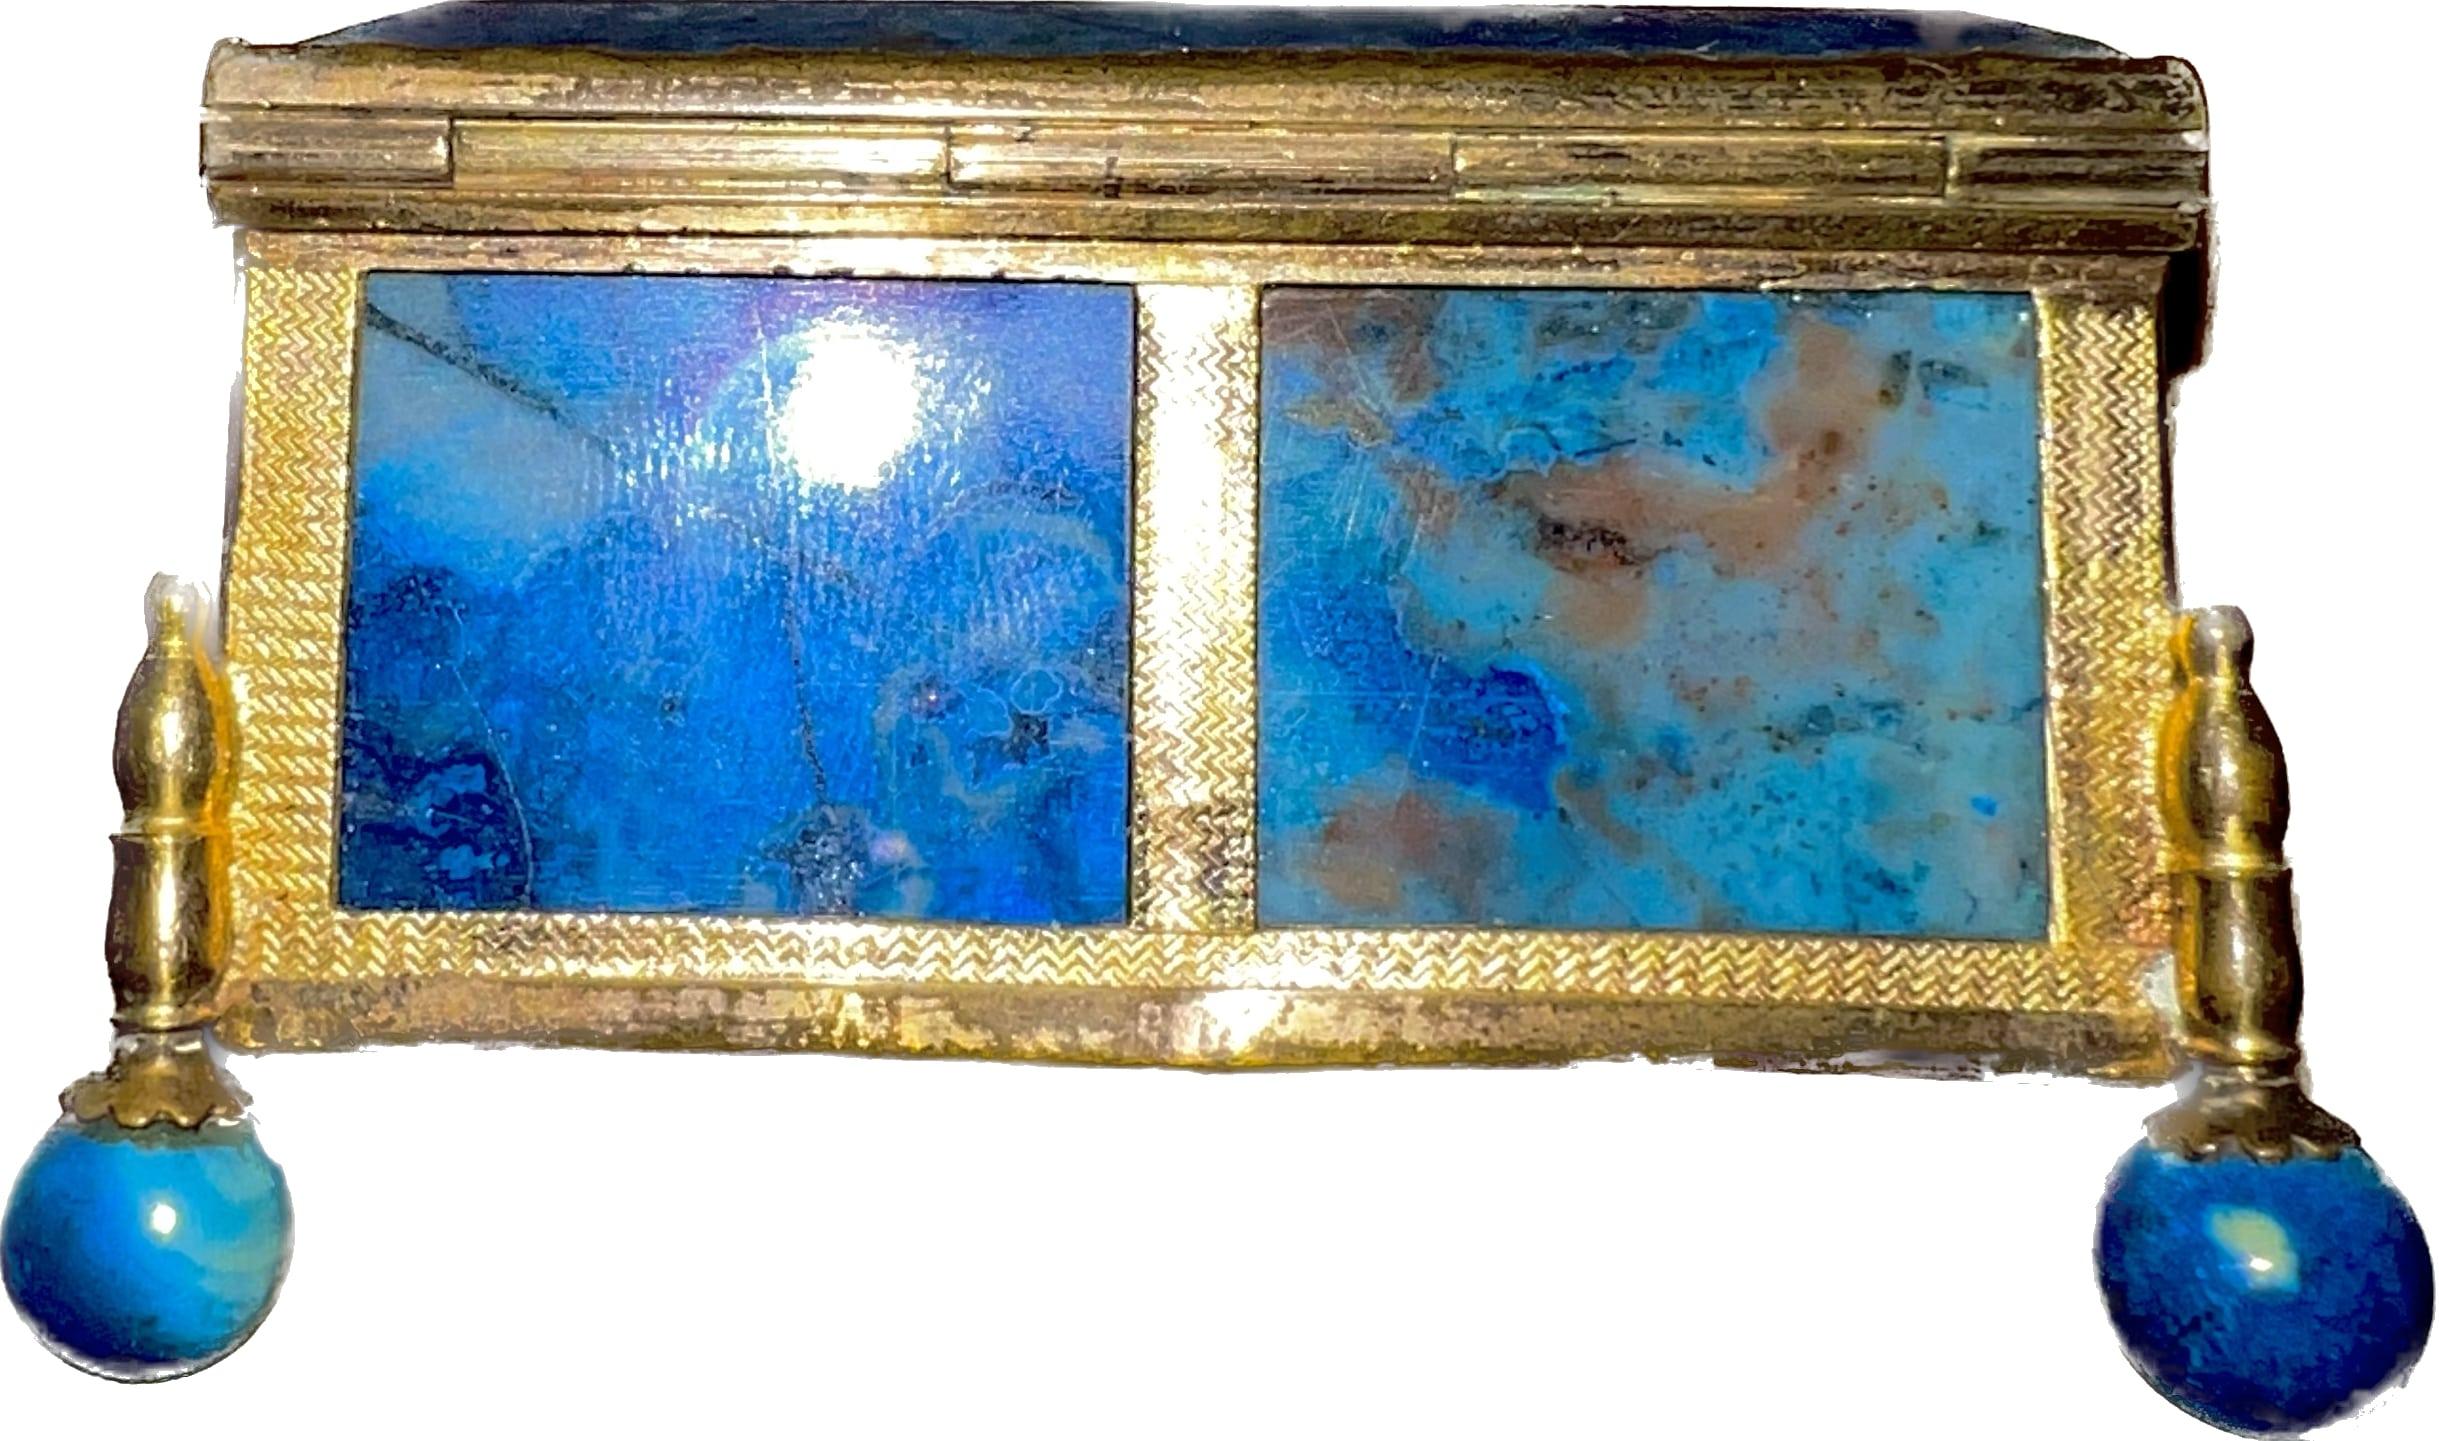 Mr. Giallo is opening his personal vault to sell a collection of his treasured antiques he's held on for so long.

ABOUT ITEM
Sodalite w/Gold Trim on four standing balls 1880s Trinket Box. Can you used as a decorative piece, a little jewelry box